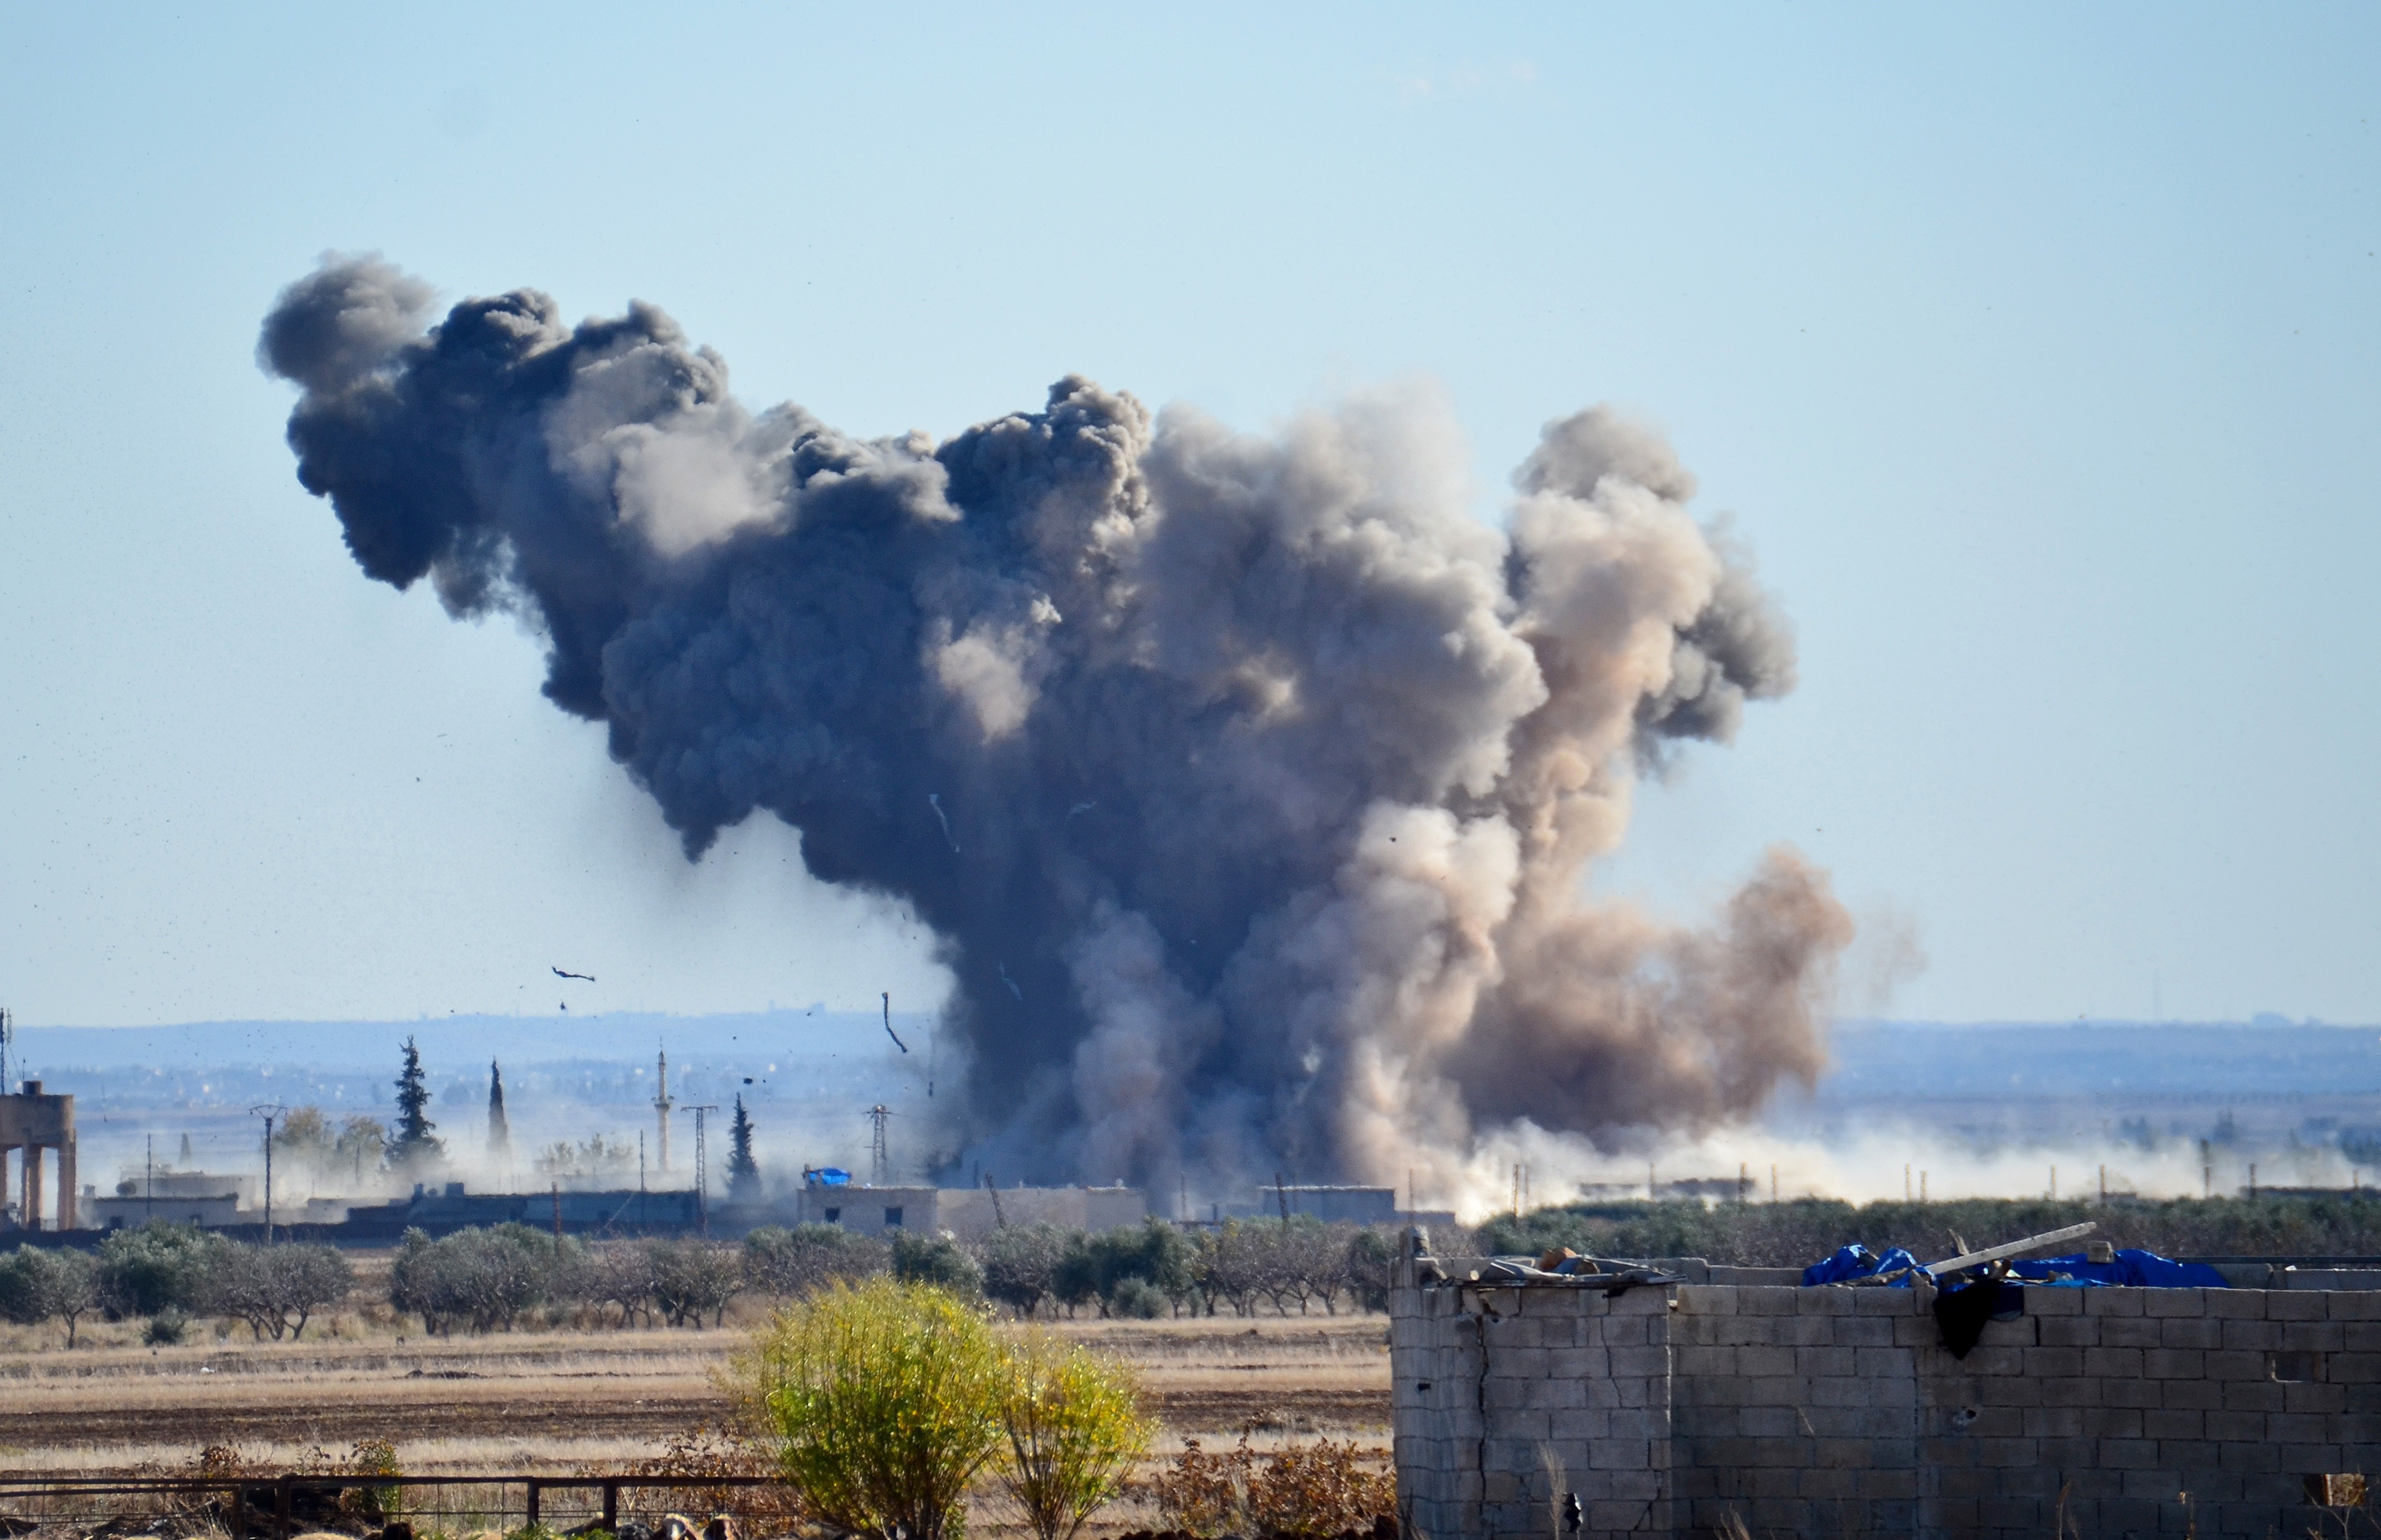 Smoke rises after the U.S.-led coalition air strikes hit ISIS positions at Brekida village in Aleppo, Syria, on Dec. 3, 2015 (Anadolu Agency—Getty Images)